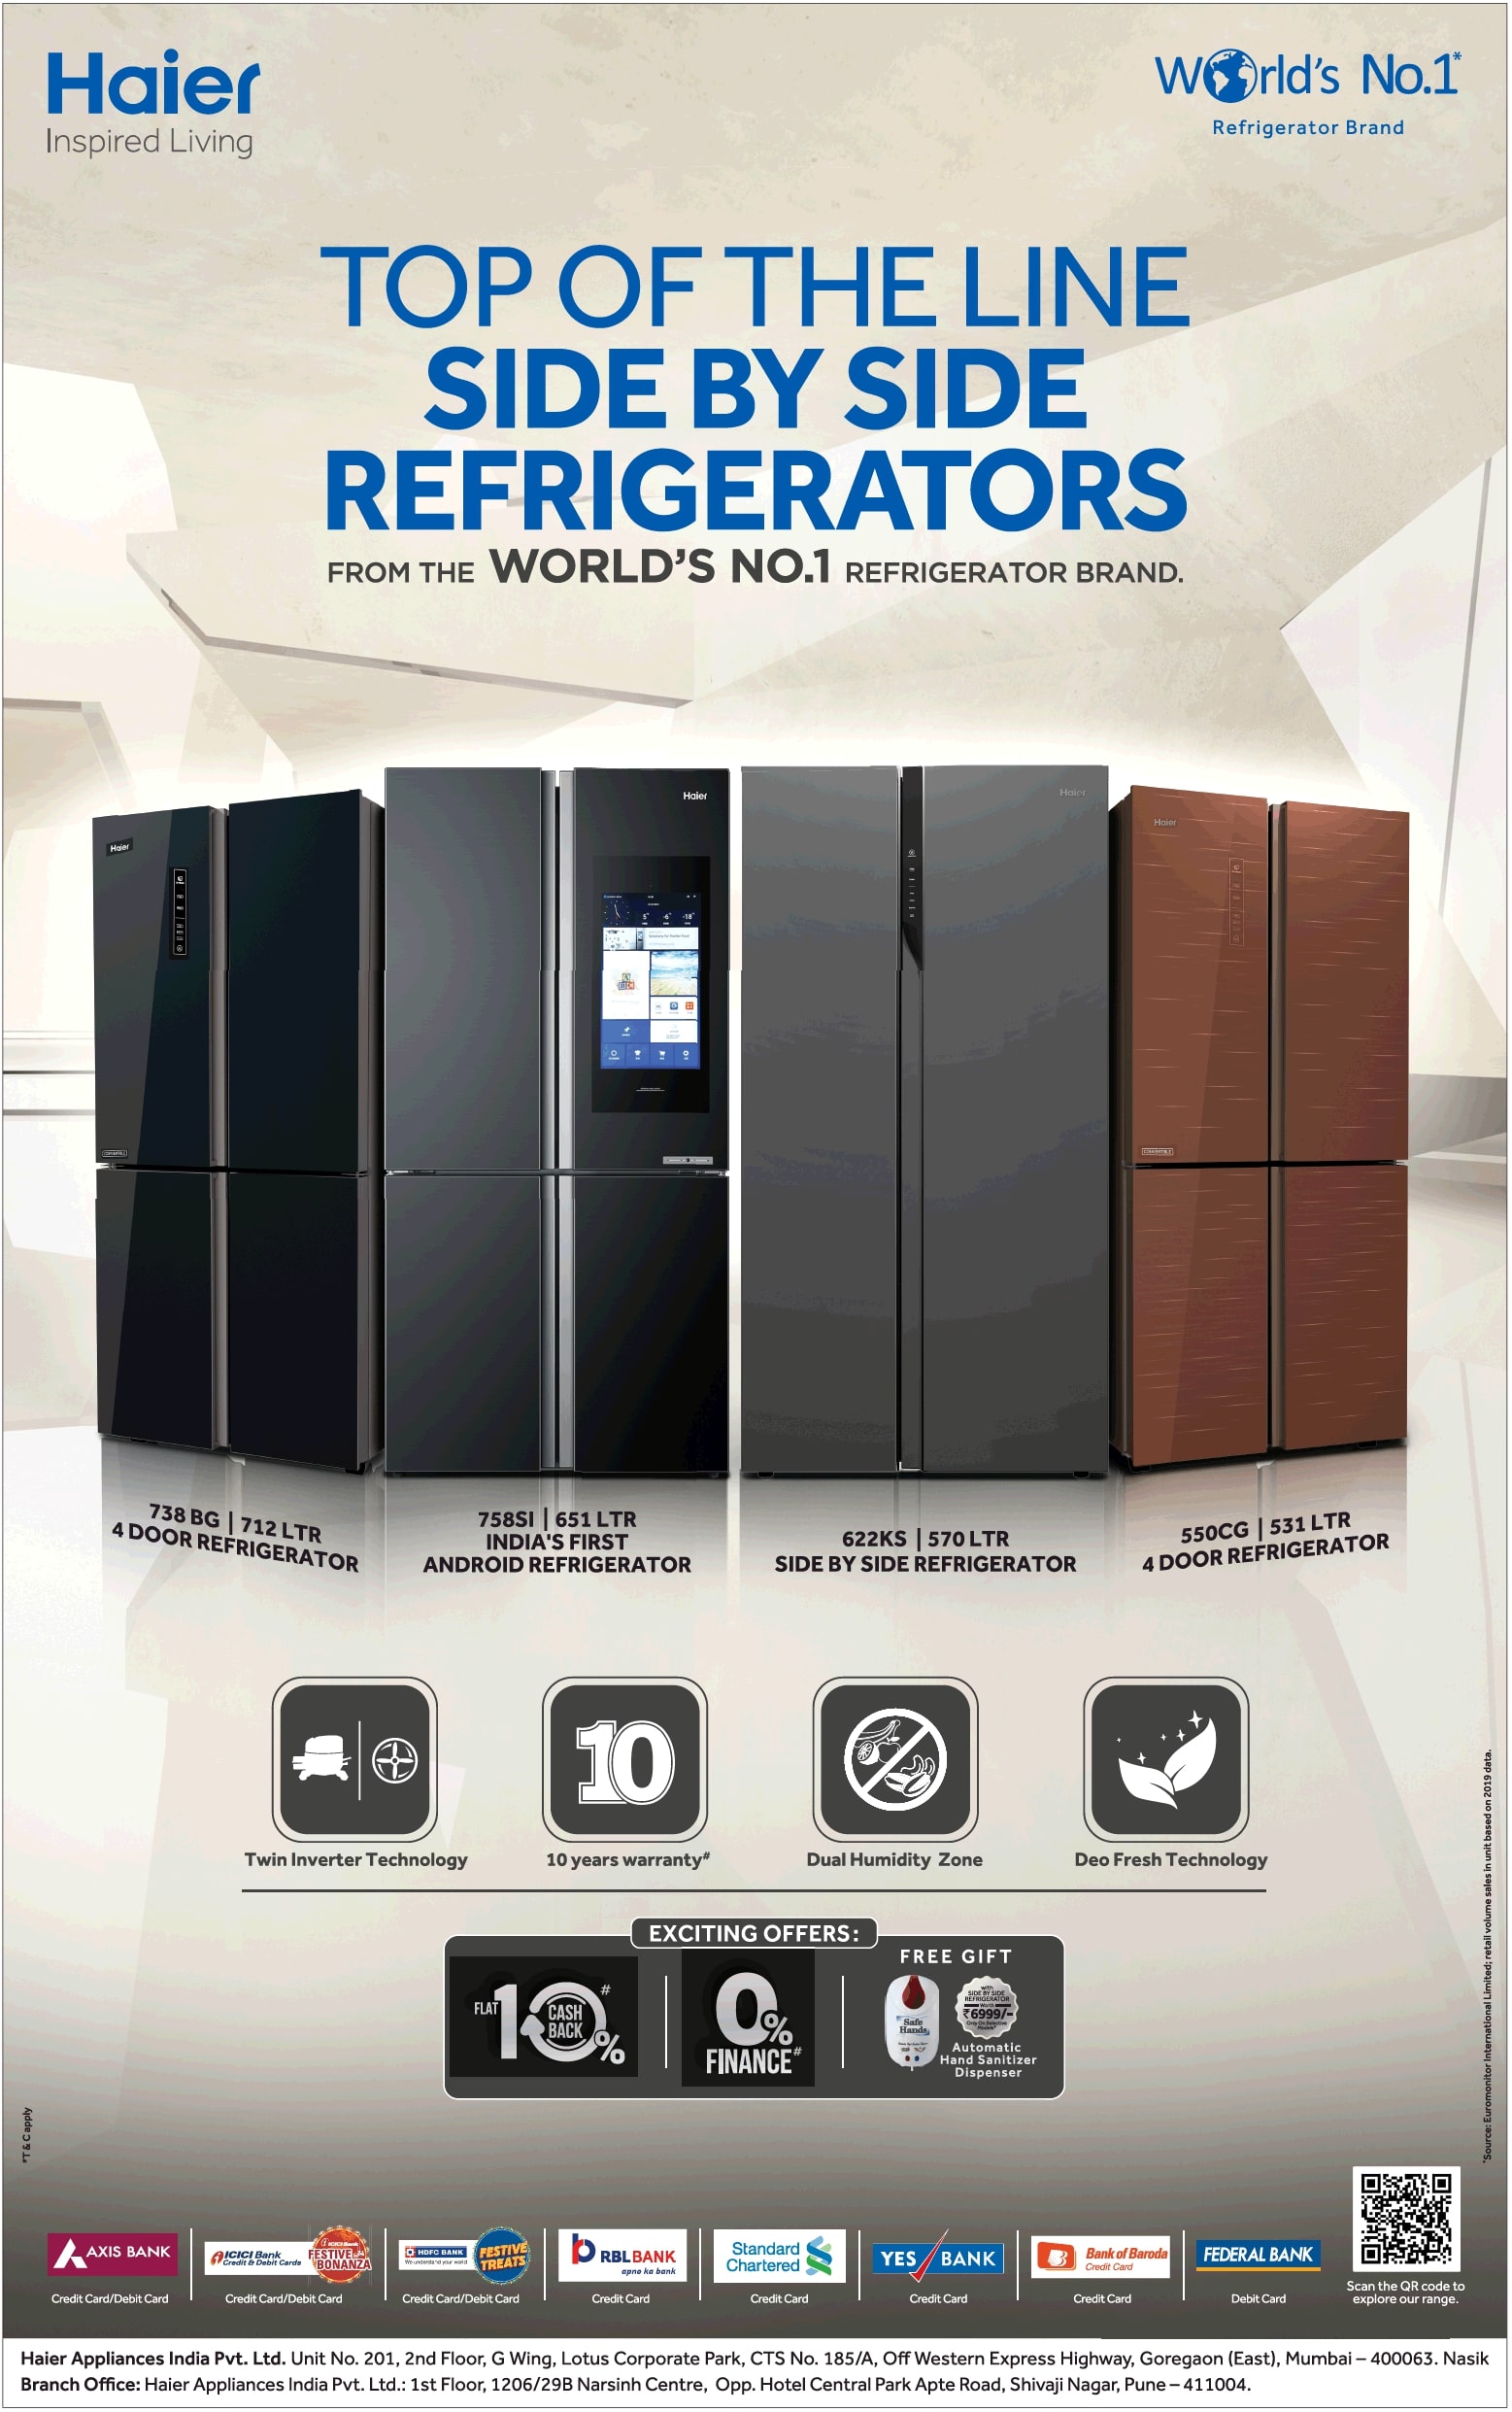 haier-top-of-the-line-side-by-side-refrigerators-from-the-worlds-no-1-refrigerator-brand-ad-toi-mumbai-11-11-2020